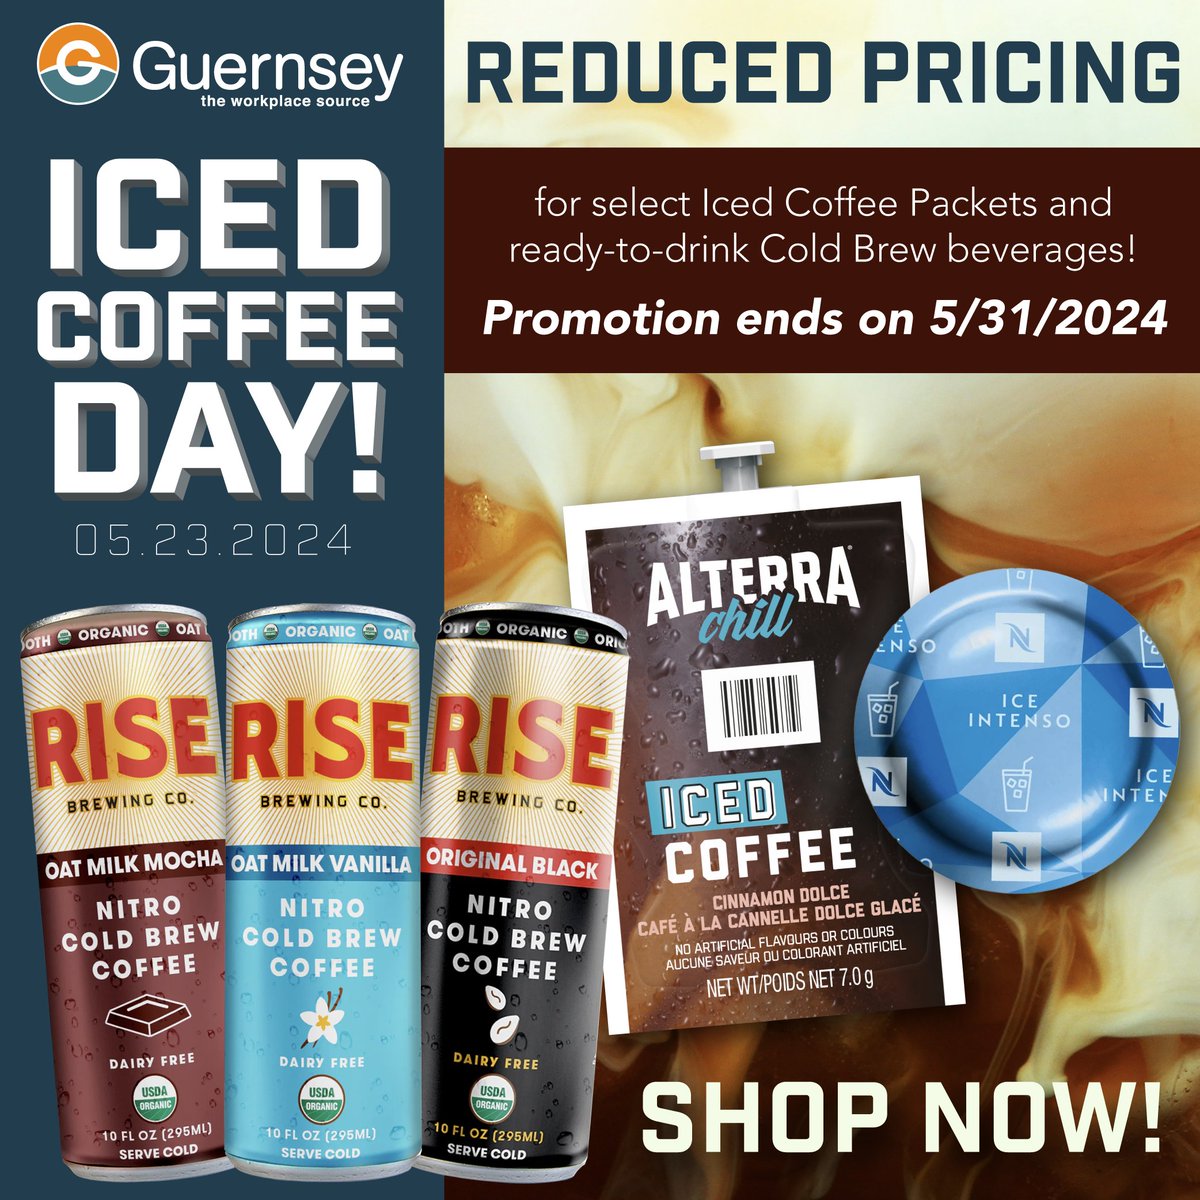 Tomorrow is Iced Coffee Day (5/23)! @buyguernsey is offering reduced pricing for select Iced Coffee and ready-to-drink Cold Brew drinks until 5/31. Bring the cool to your breakroom today! tinyurl.com/2hep2ptt #BuyGuernsey #RiseBrewingCo #Flaviacoffee #NespressoCoffee